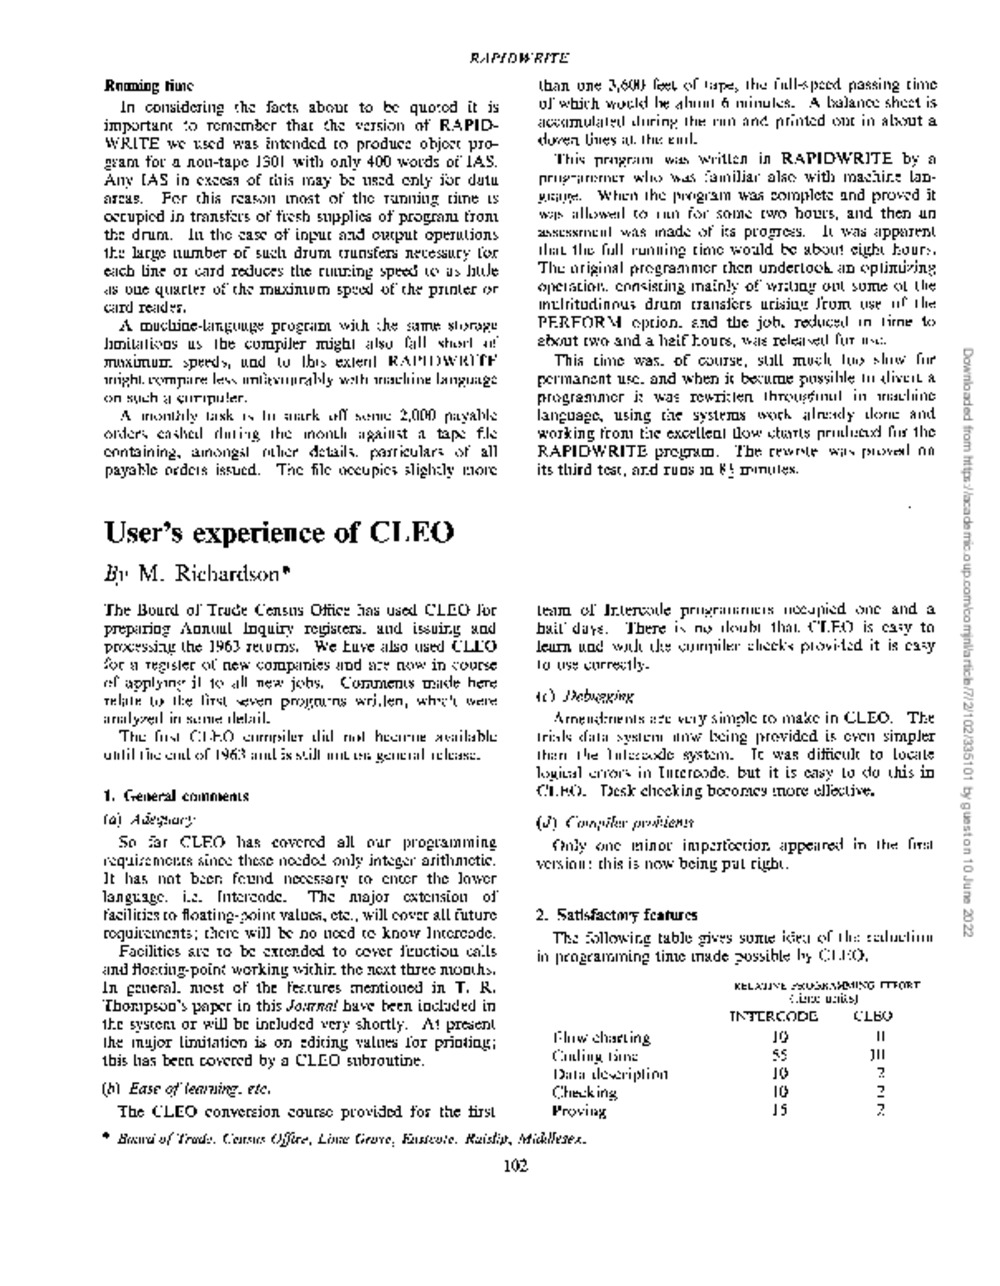 Article: Users experience of CLEO